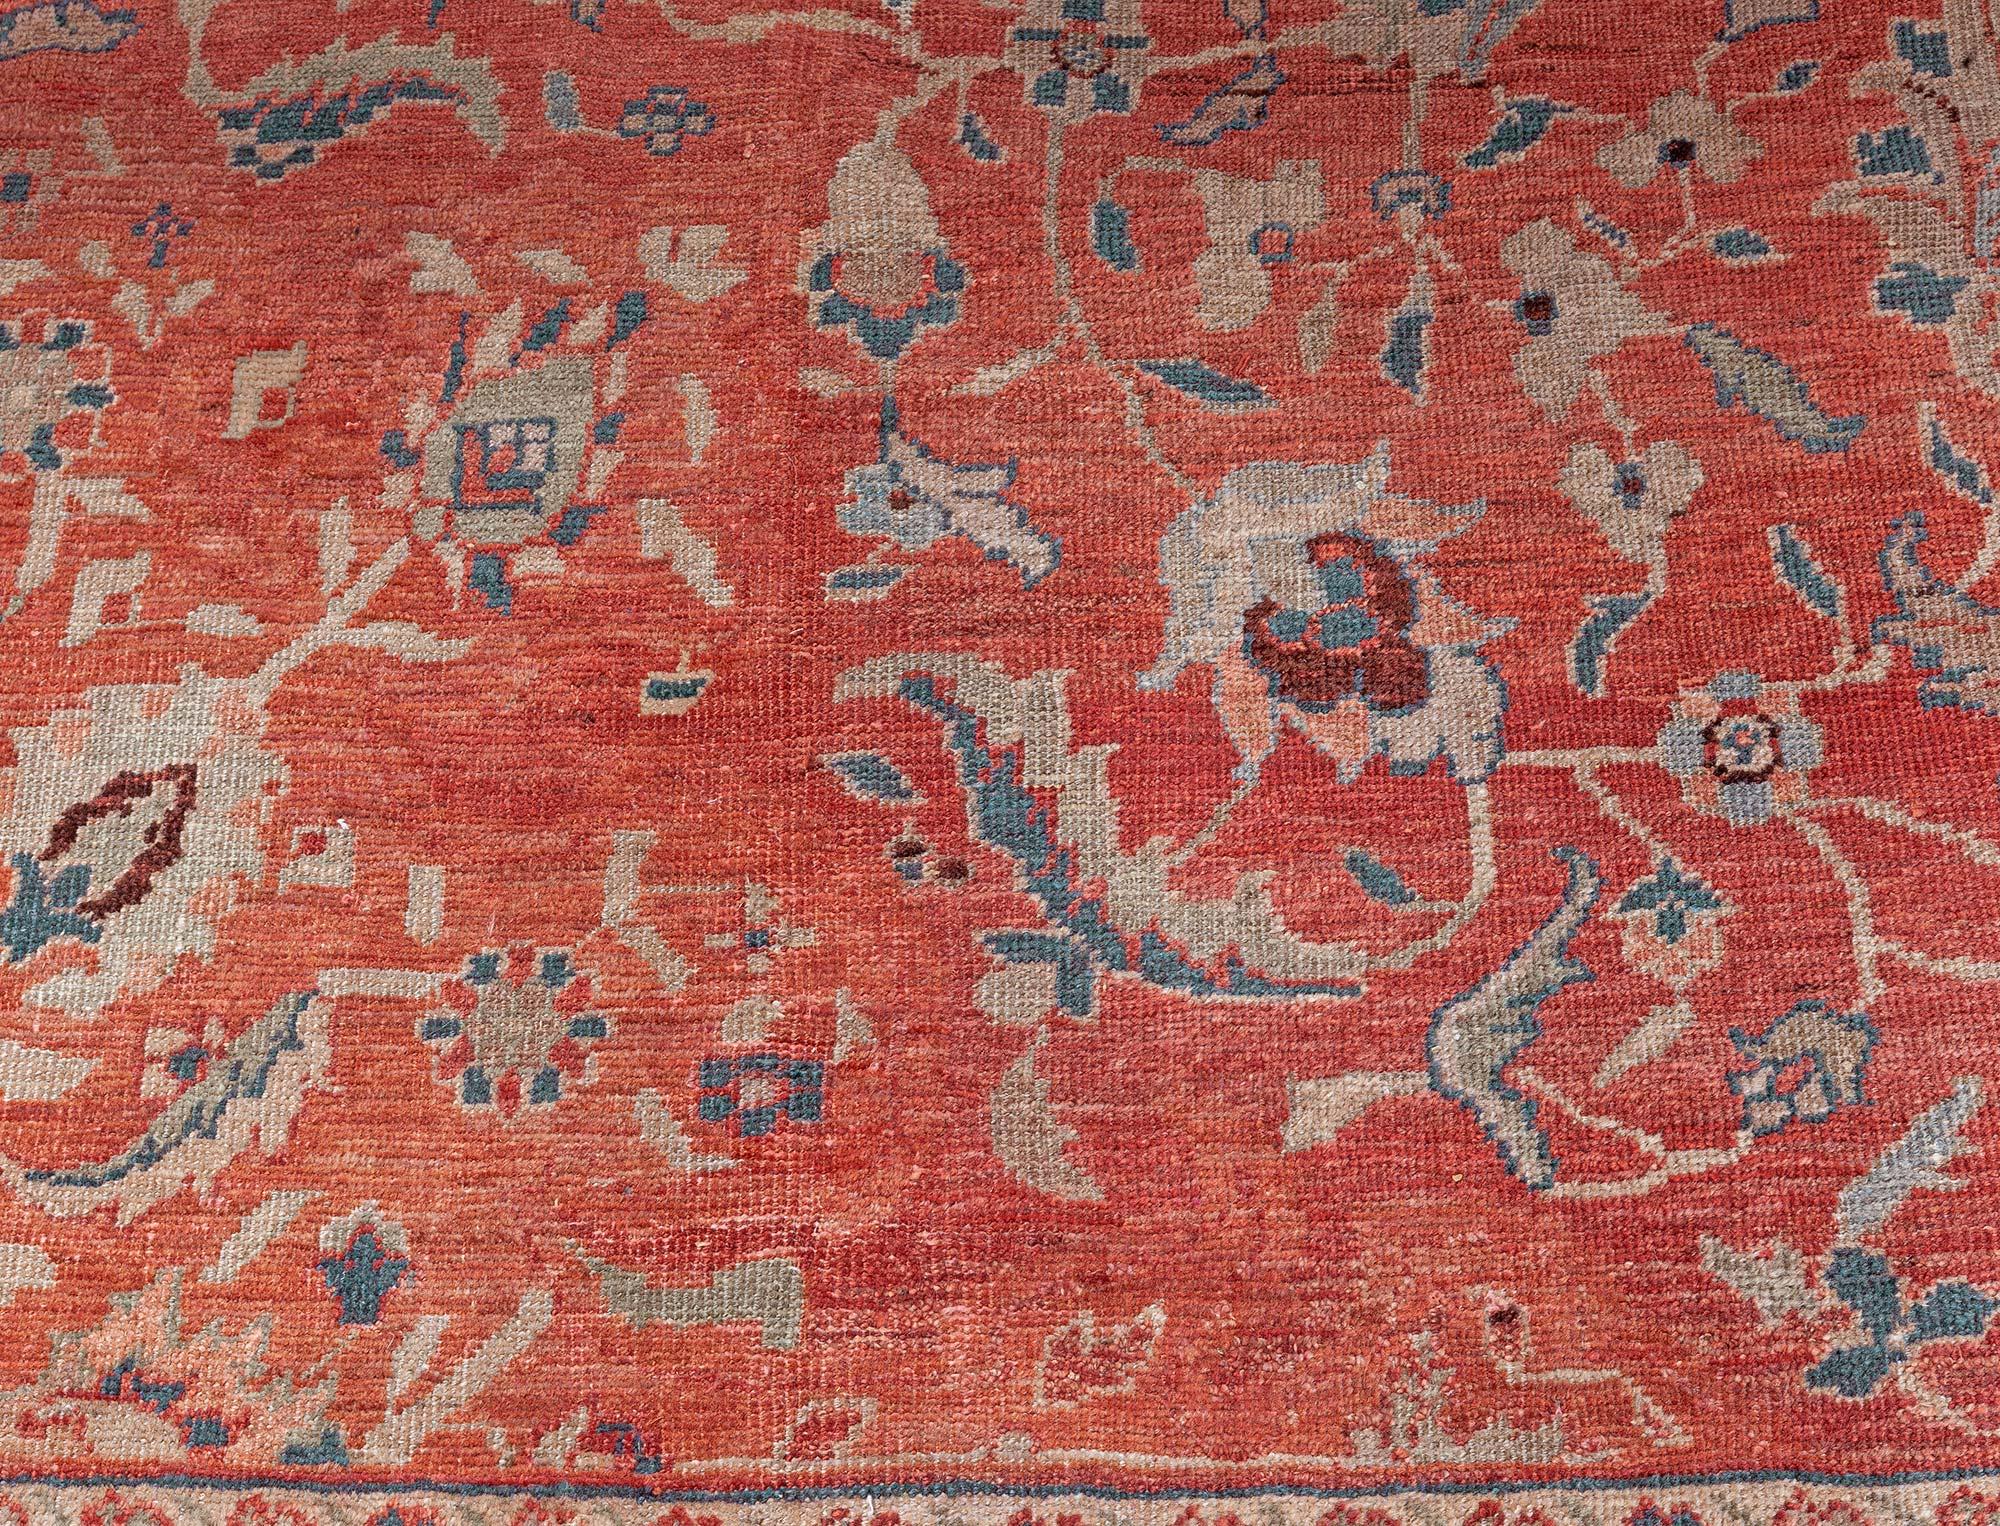 Antique Persian Sultanabad red blue handmade wool
Size: 13'0